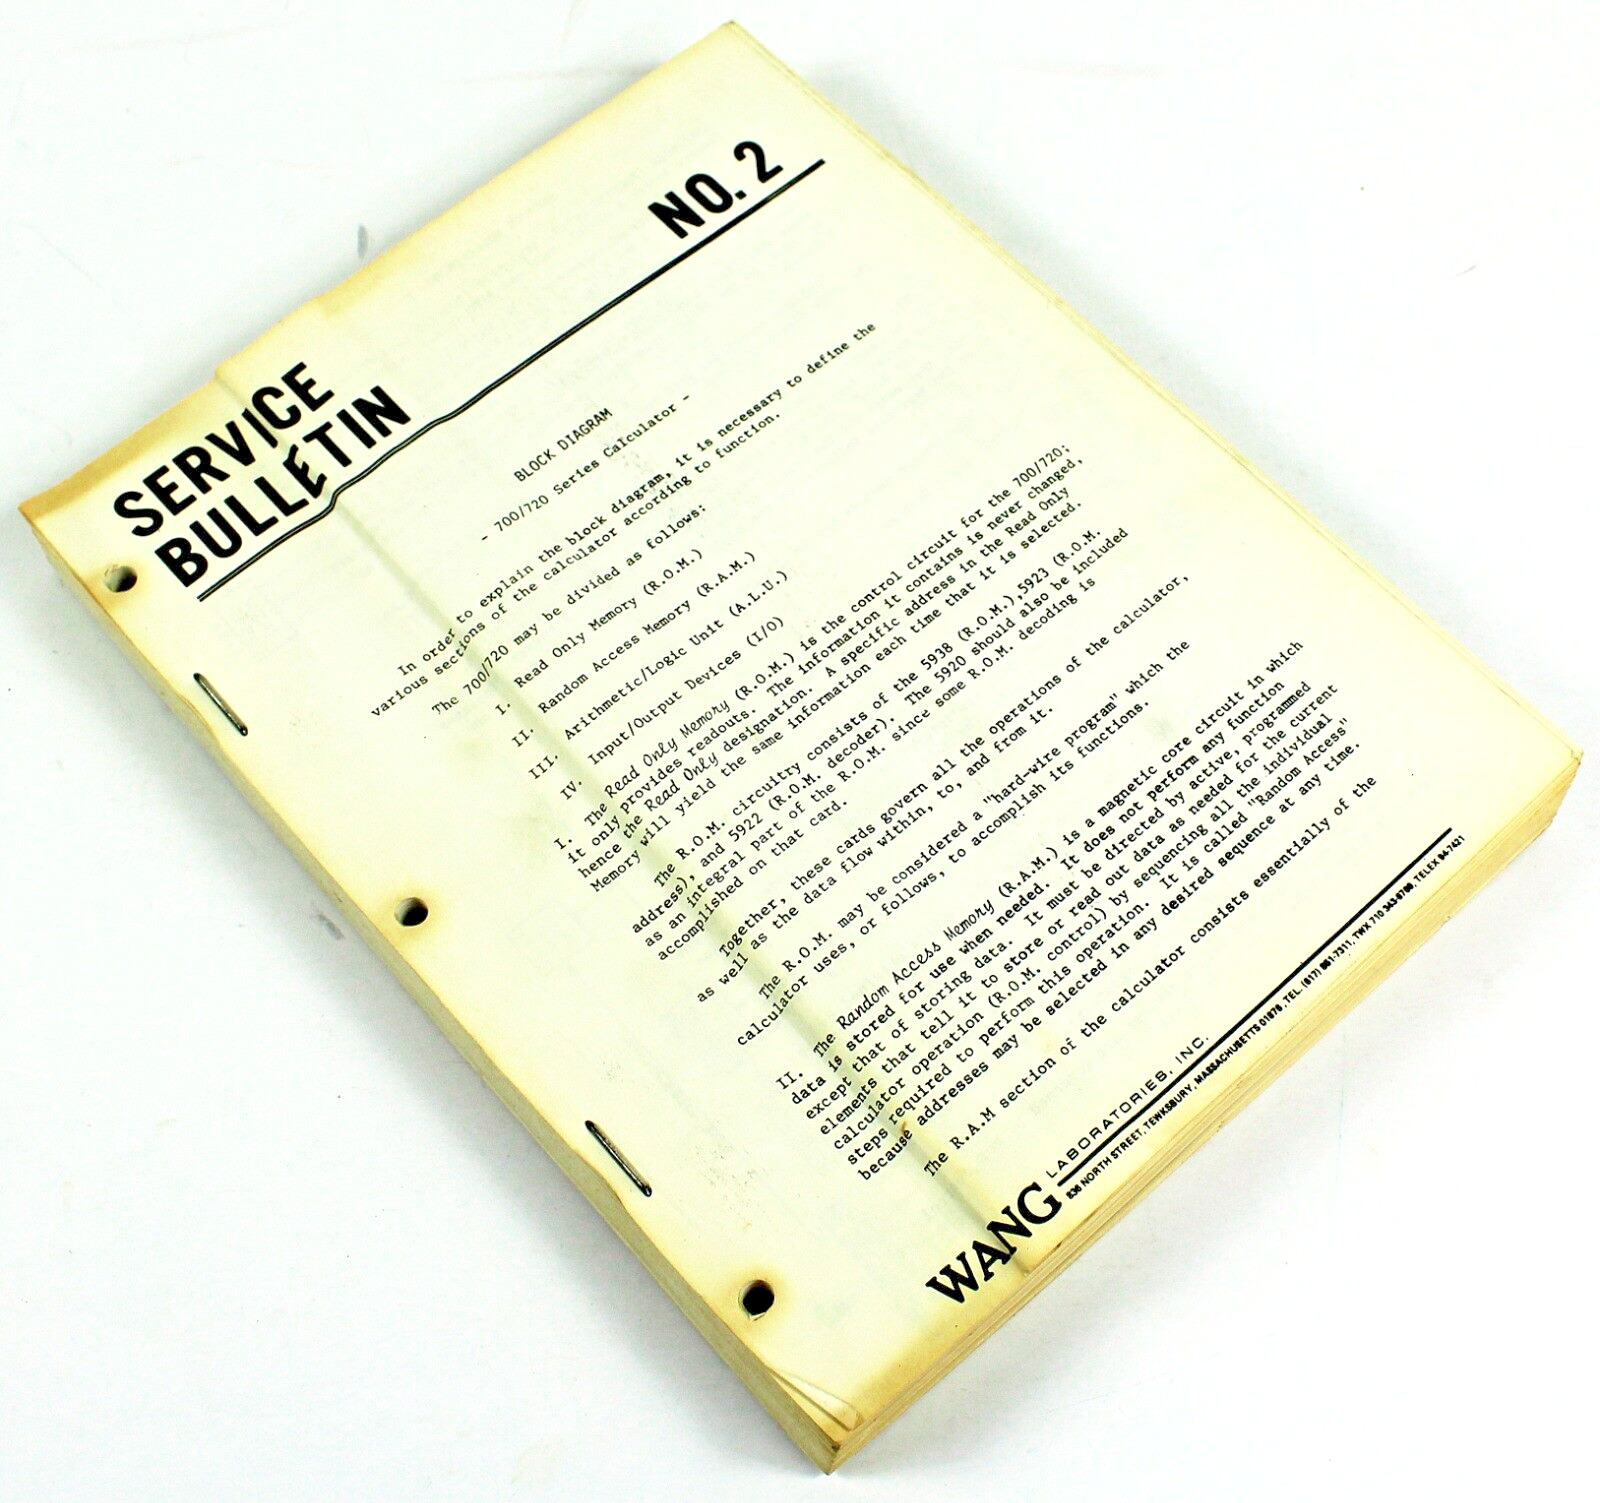 1973 WANG LABORATORIES SERVICE BULLETINS & More for 700/720 Series Calculator